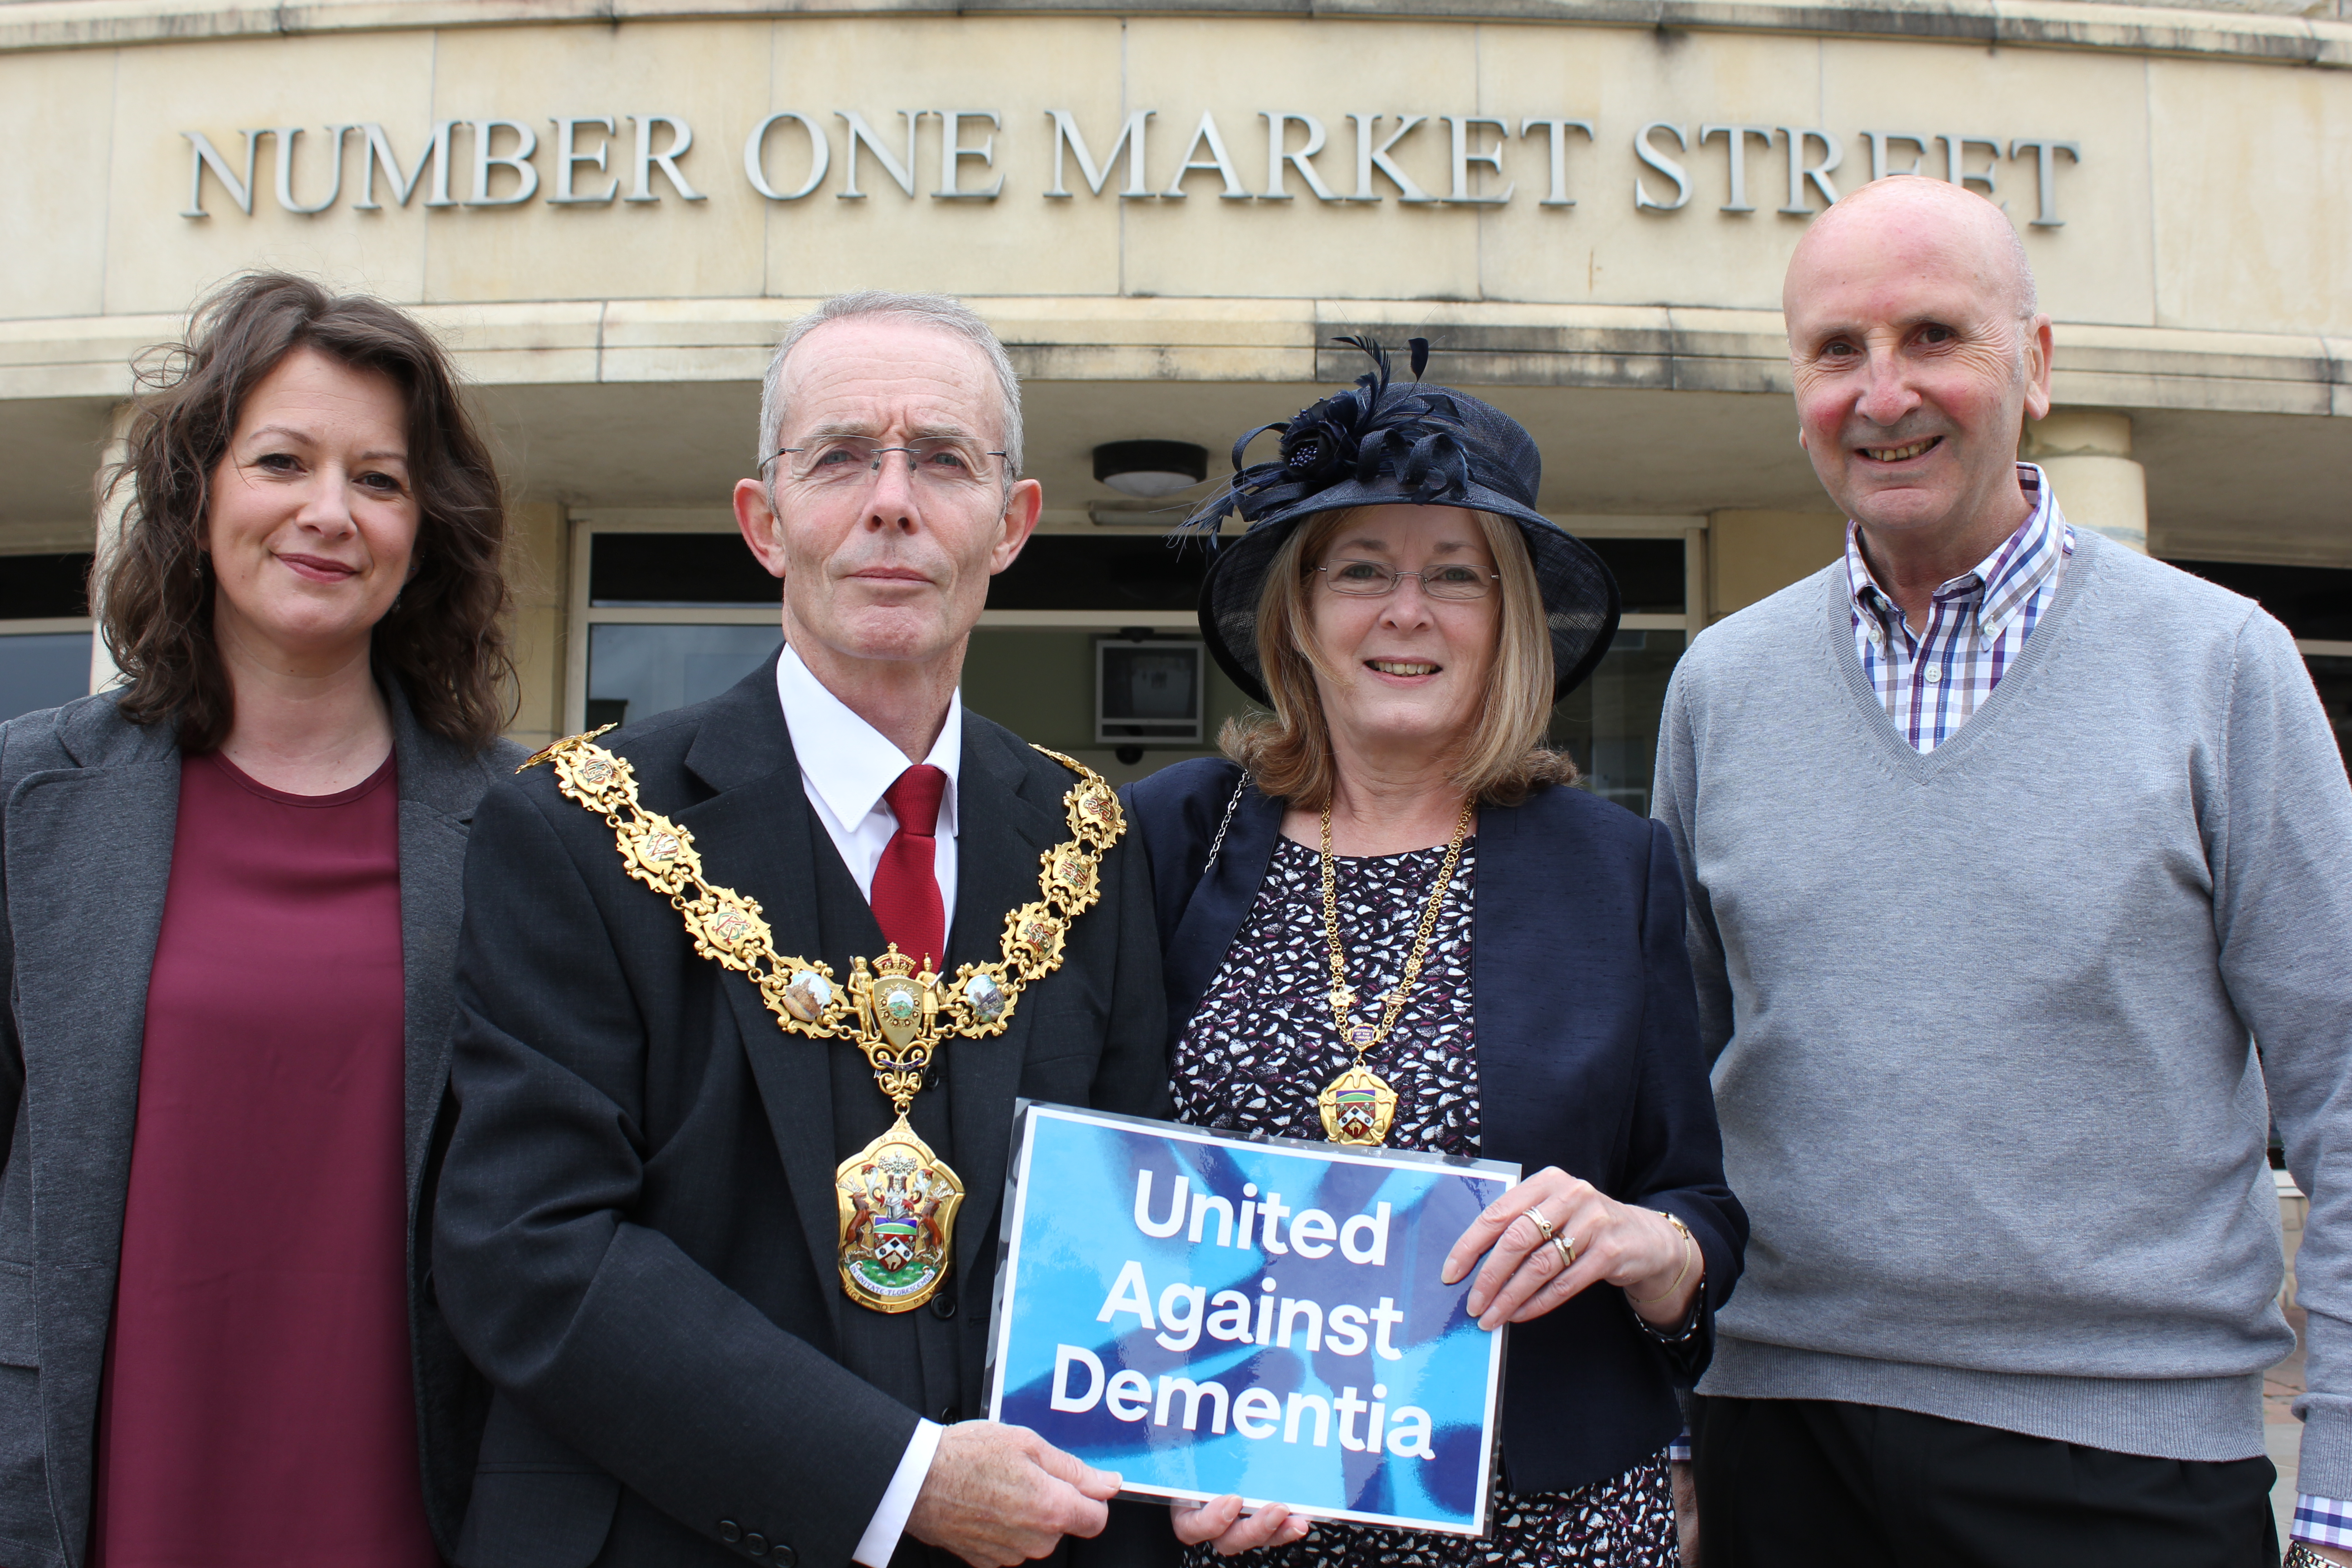 Number One in aim to make Pendle Dementia friendly